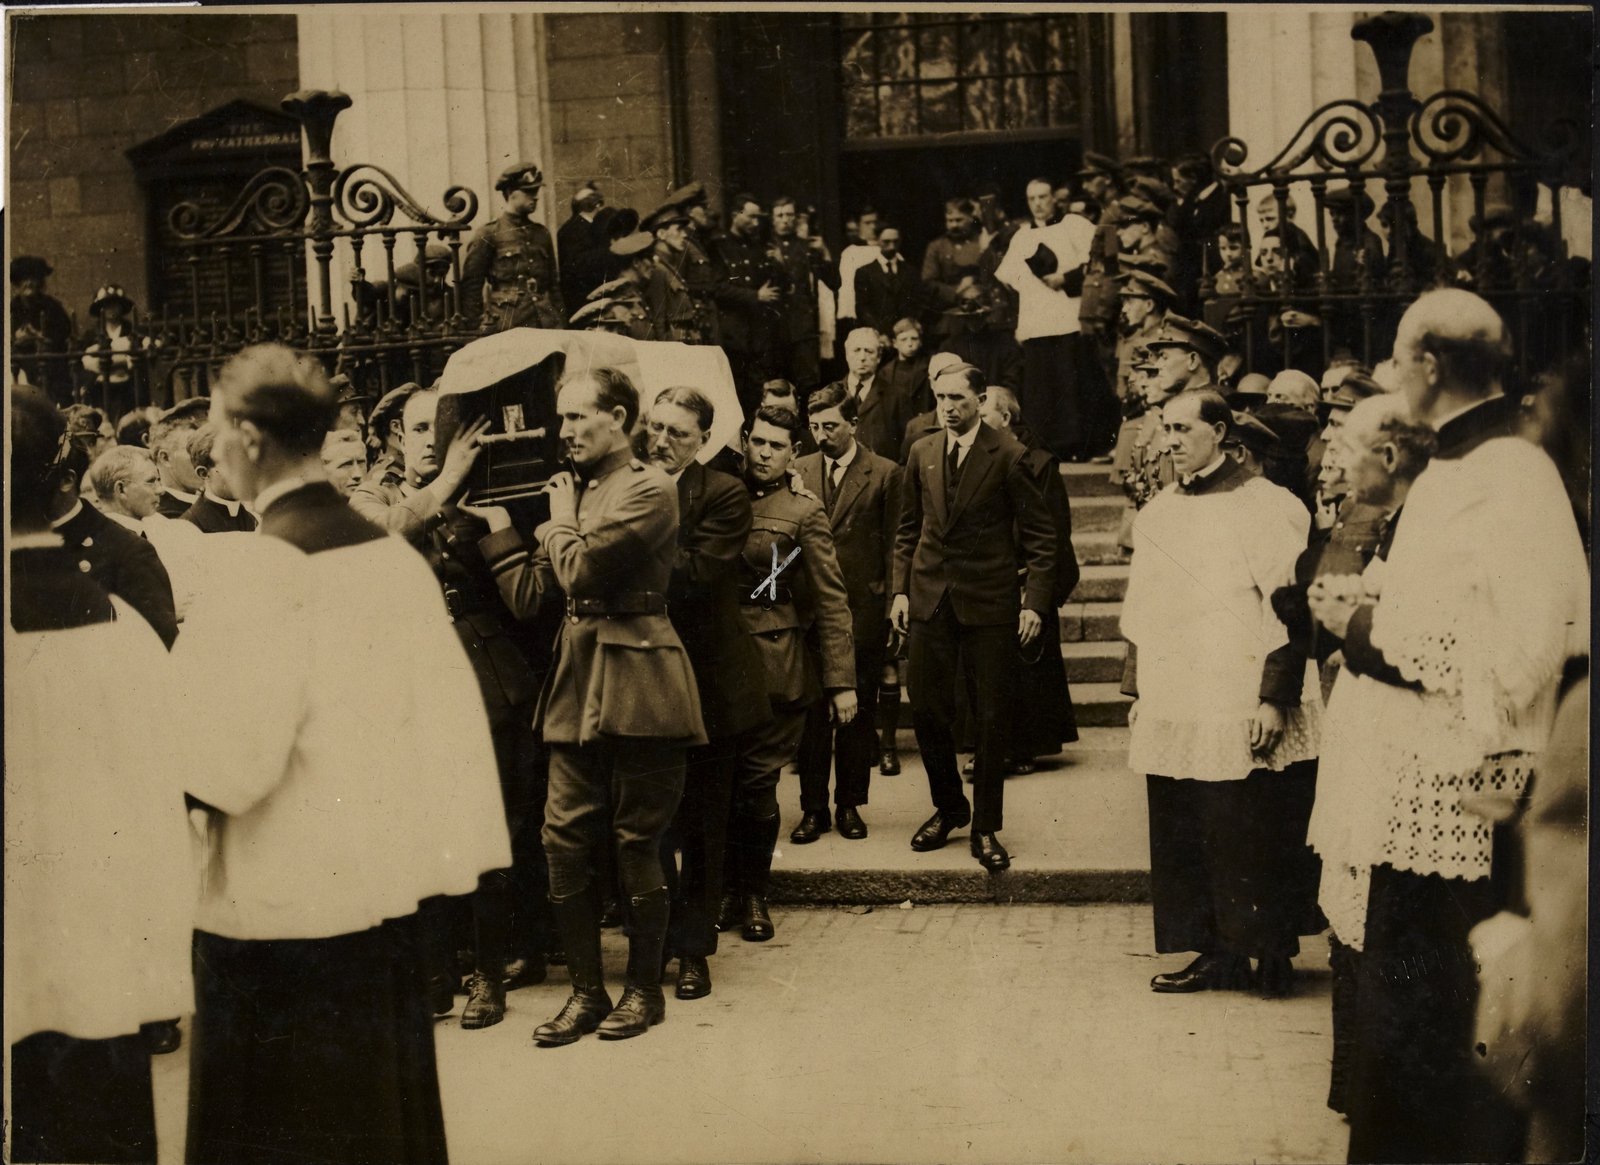 Image - Michael Collins was among the pallbearers at Arthur Griffith's funeral (Pic: National Library of Ireland)